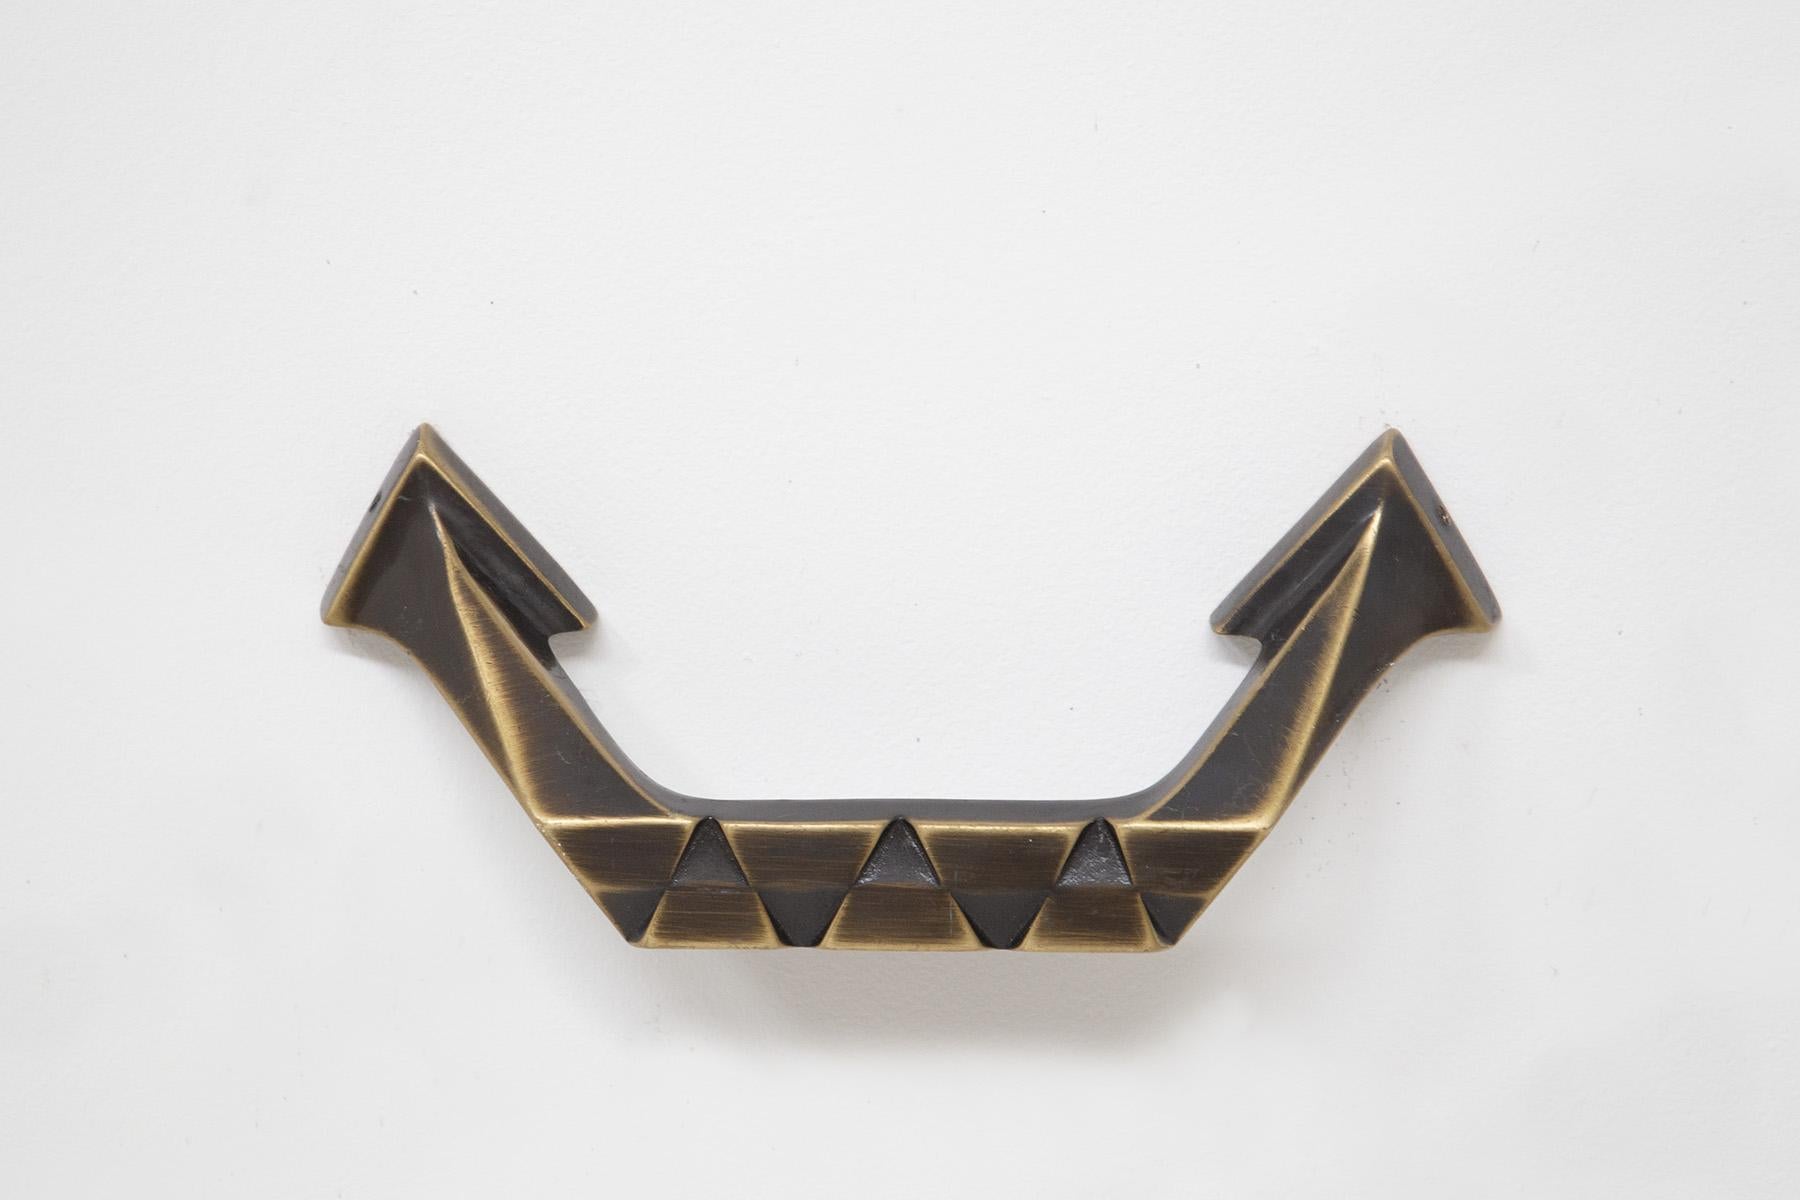 Pair of large brass handles from the European Futurist era. The handles date from the 1920s-30s. They were made entirely of brass with great skill and workmanship. The handles have a precise geometric line almost angular typical of the futurist